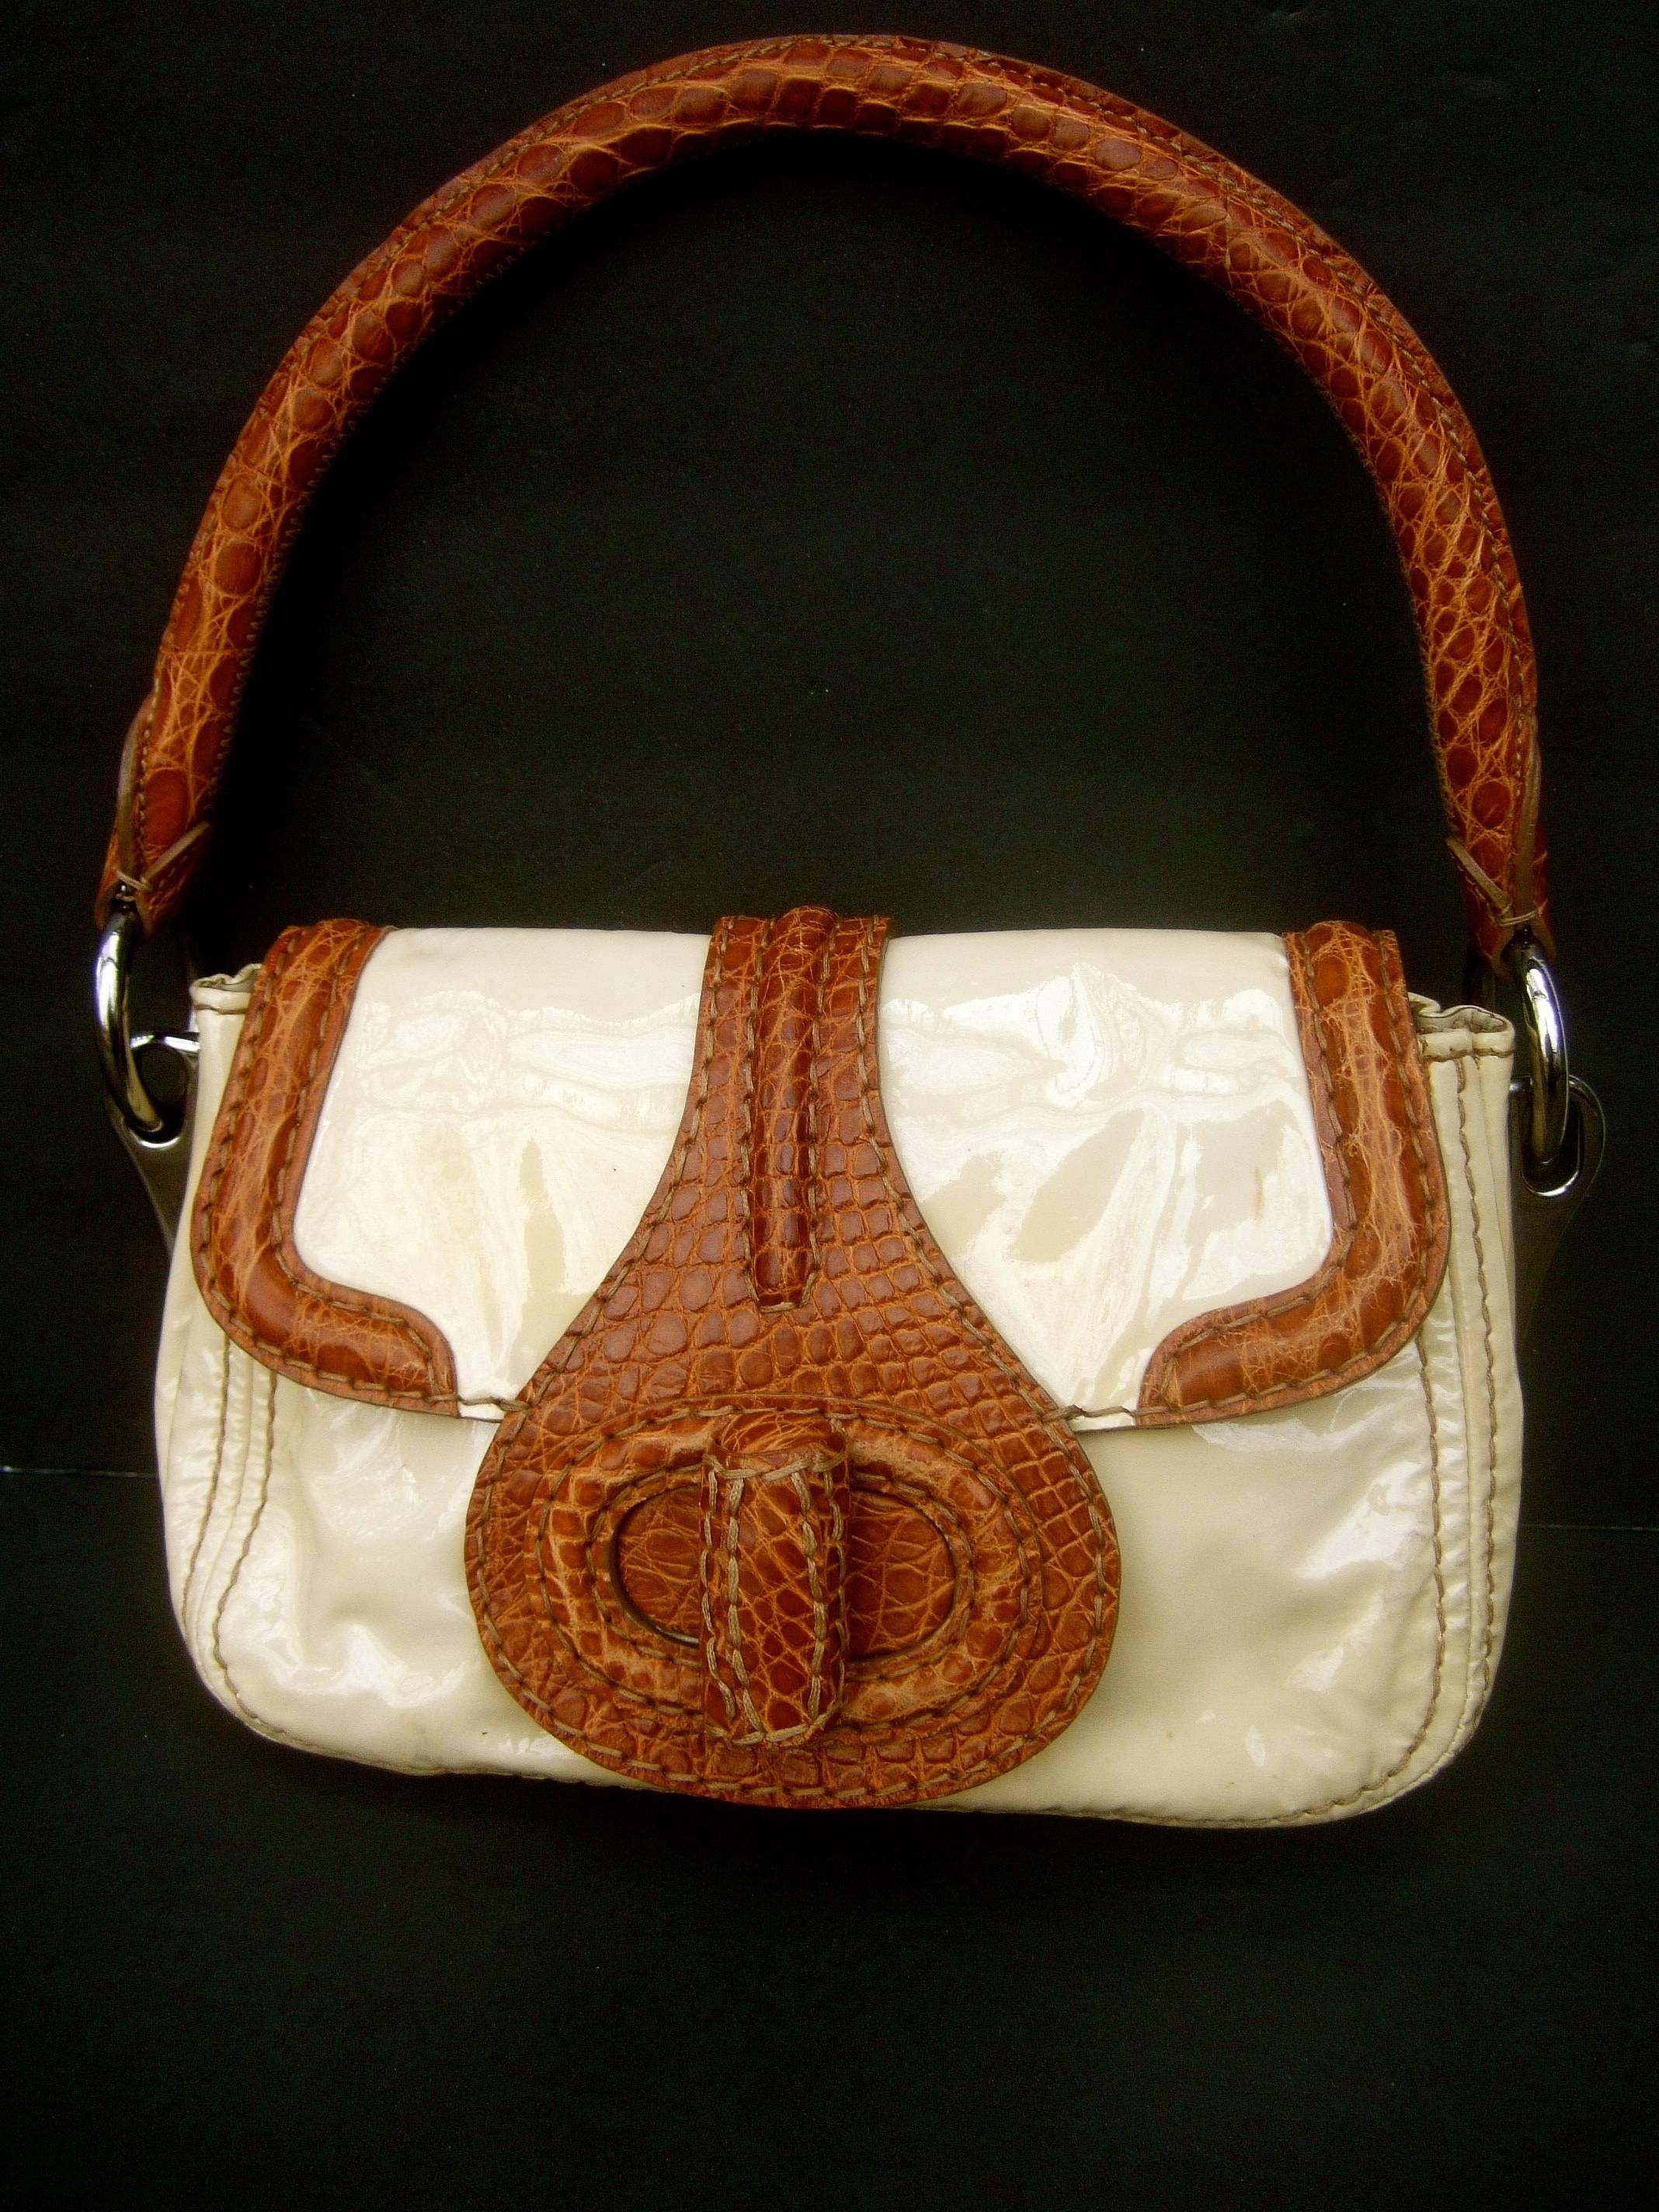 Prada Milano tan patent leather embossed trim handbag c 1990s
The stylish Italian handbag is covered with glossy tan
color patent leather 

The handle, flap cover trim and clasp are distinguished 
with brown embossed leather that emulates reptile